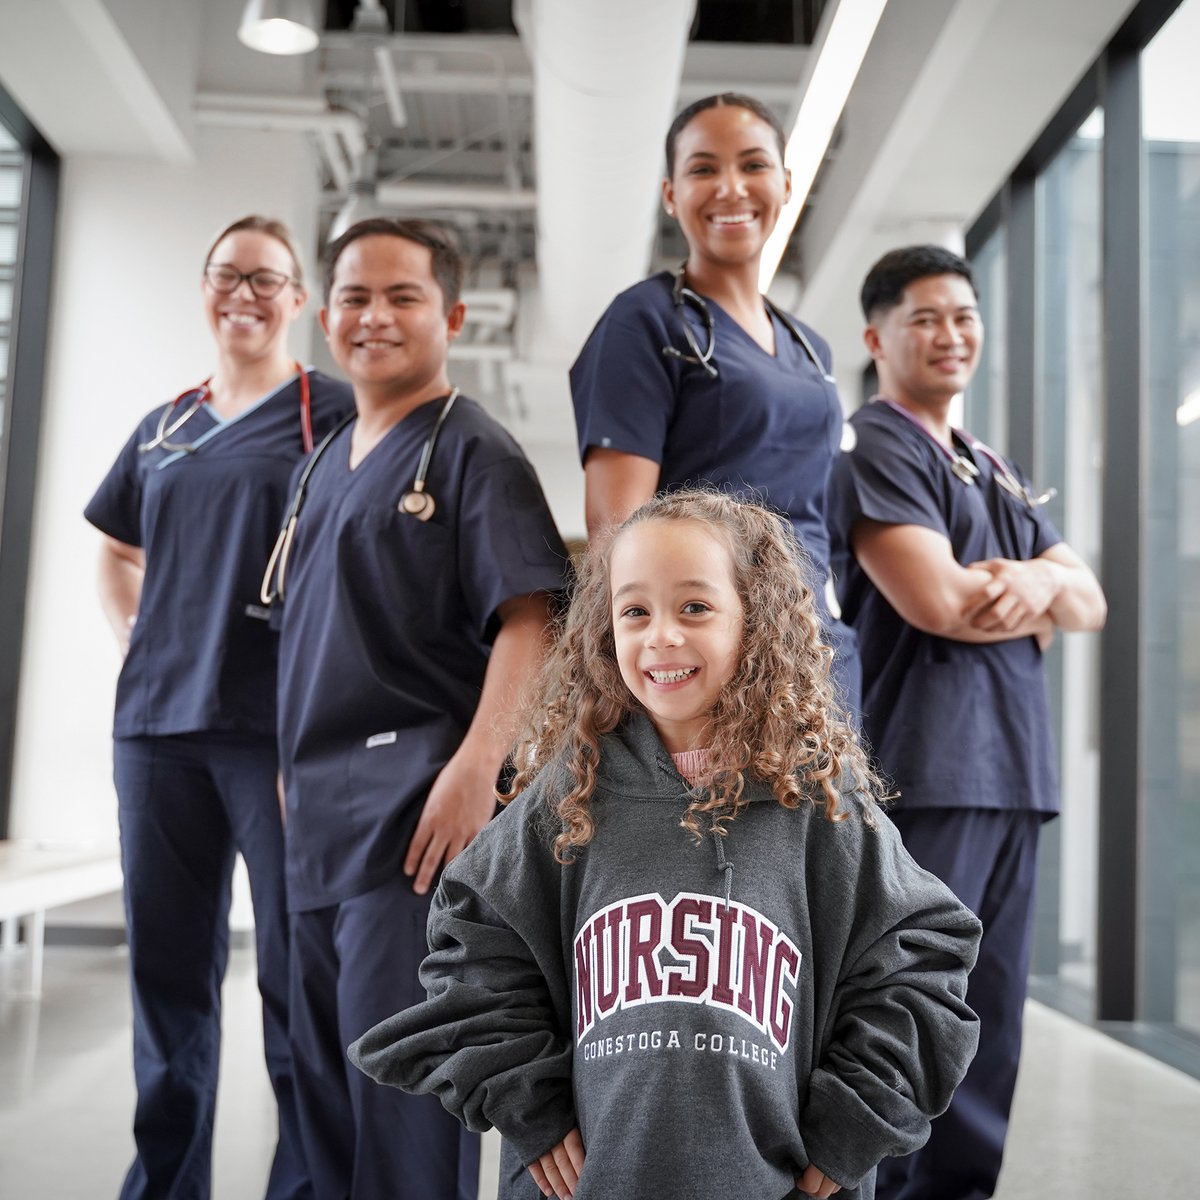 Nurses make a tremendous impact on individuals, communities, and the future of health care. Drop a 💛 in the comments to help us celebrate FUTURE nurses this National Nursing Week!
–
#BScN #CNA2024 #NursingWeek2024 #NationalNursingWeek #conestogacollege #thinkconestoga